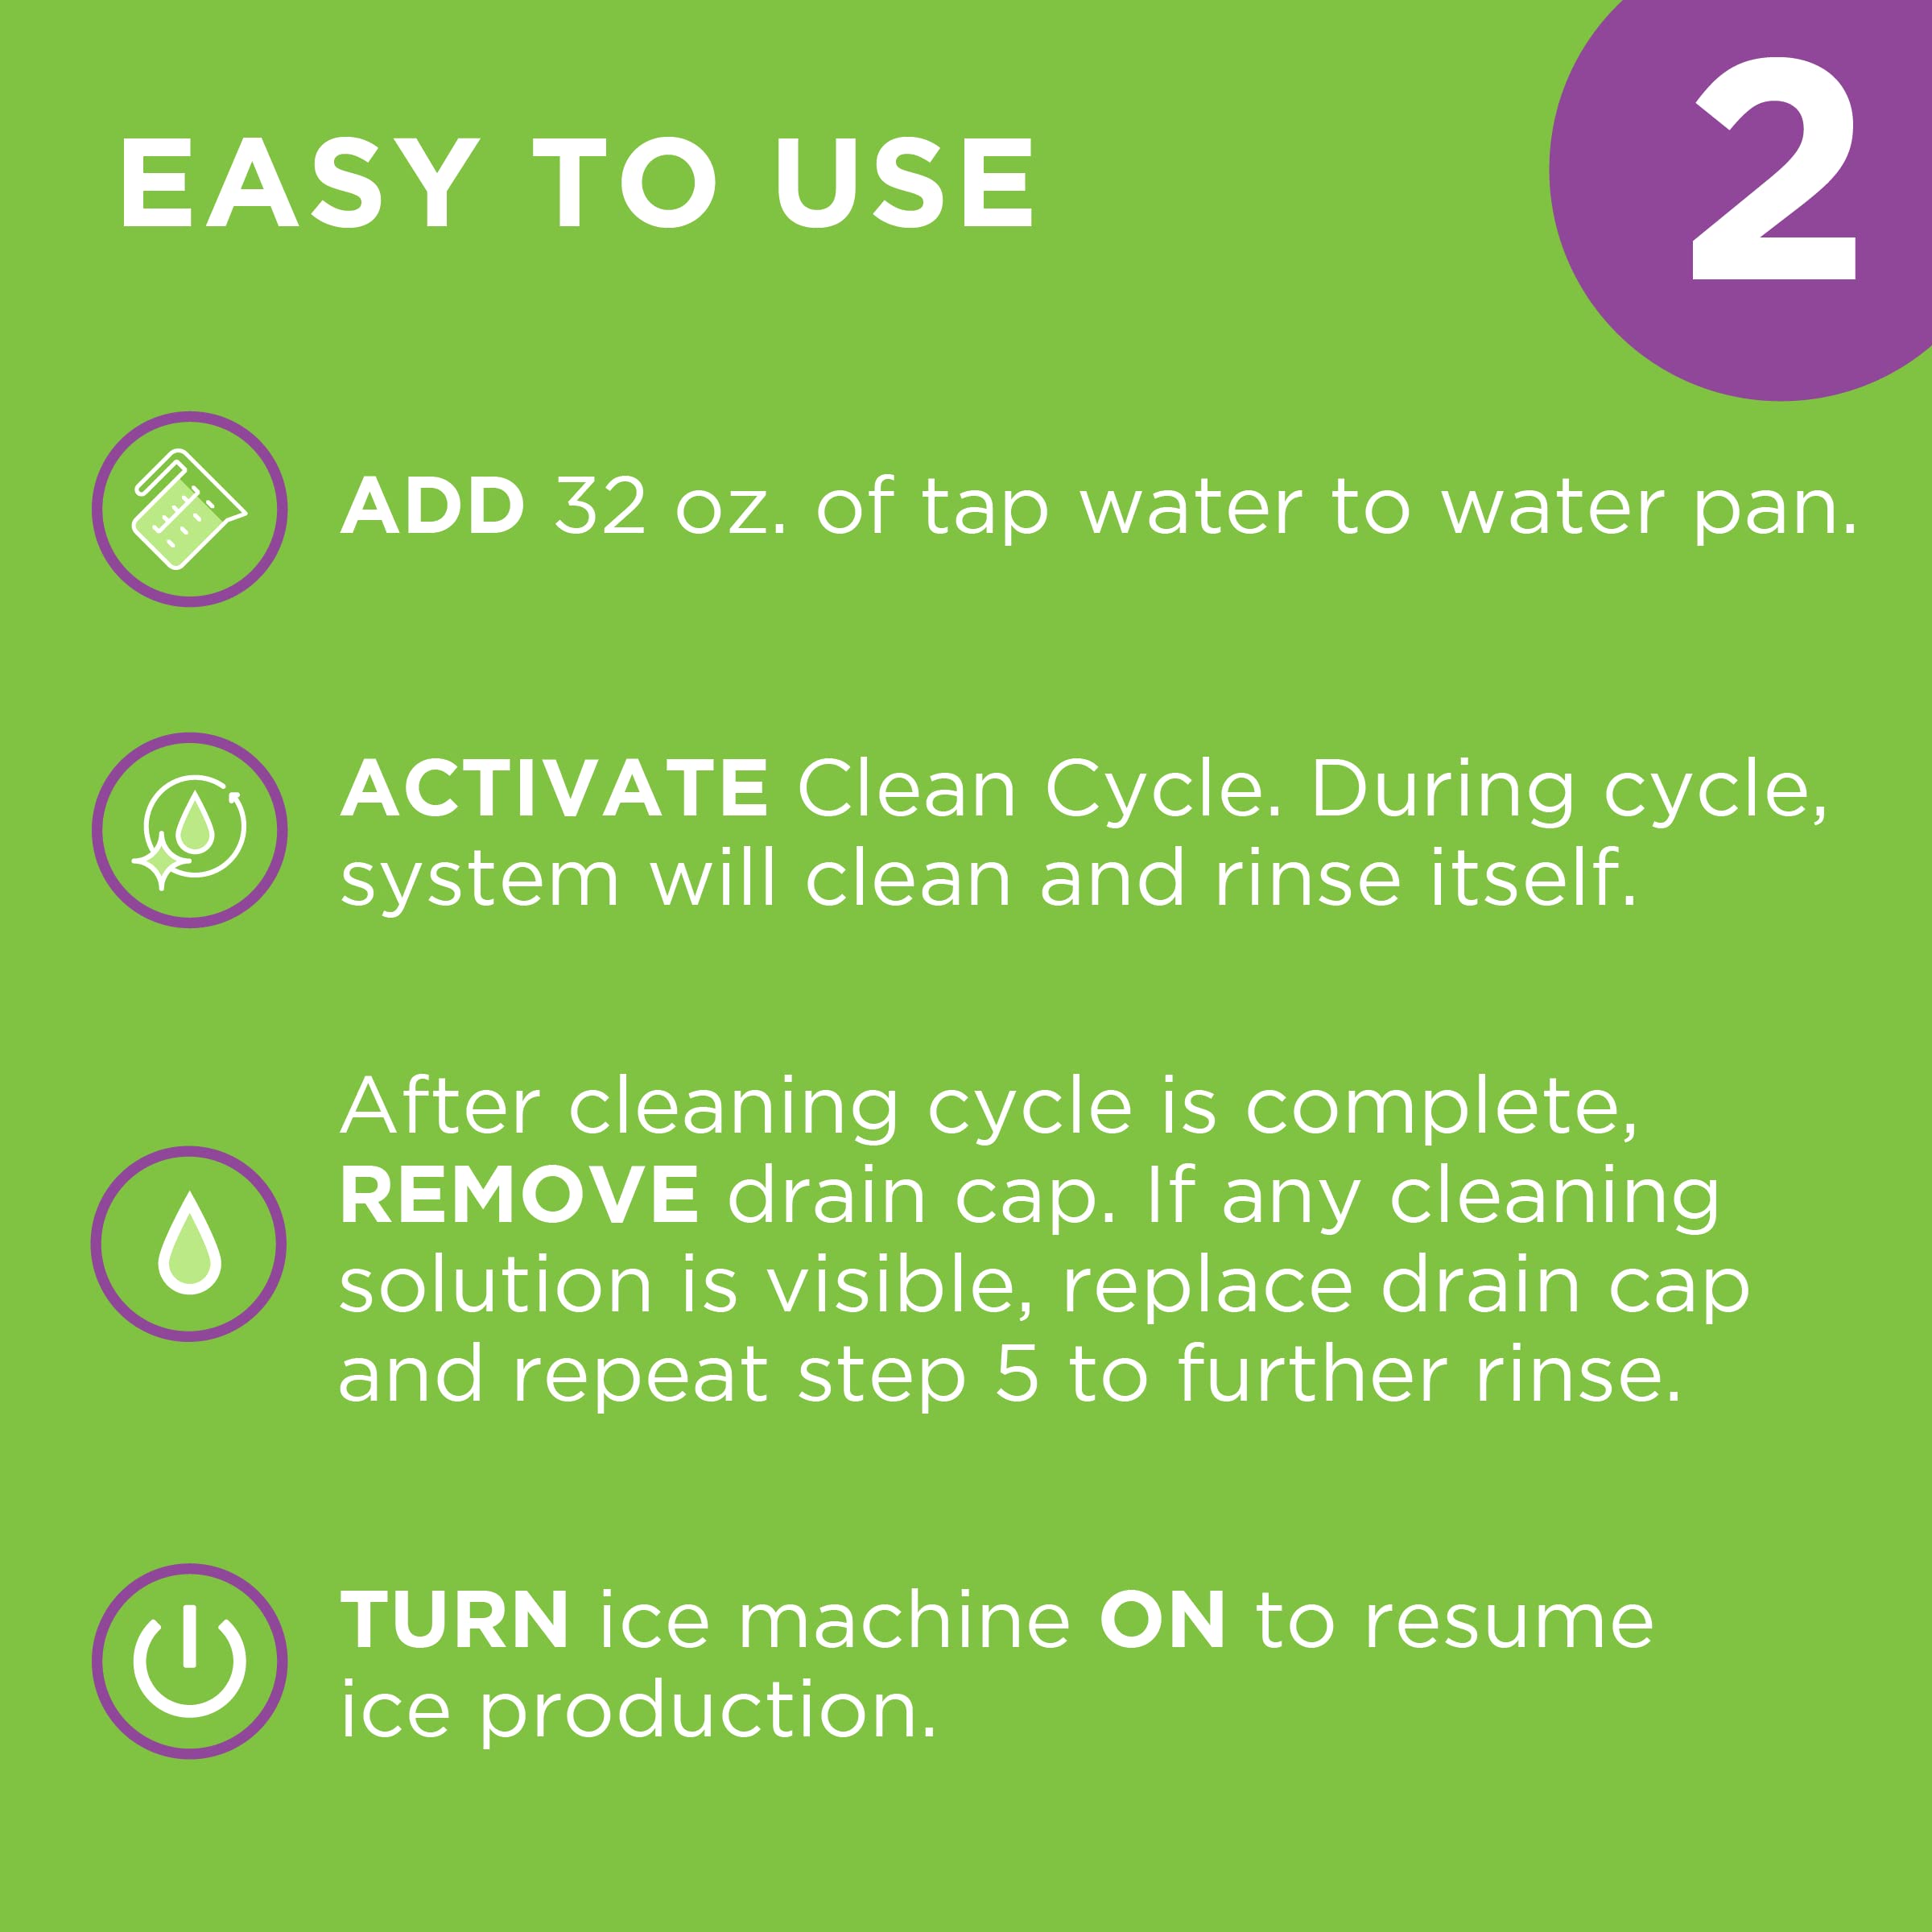 Affresh Ice Machine Cleaner, Helps Remove Hard Water and Mineral Buildup for Great-Tasting Ice